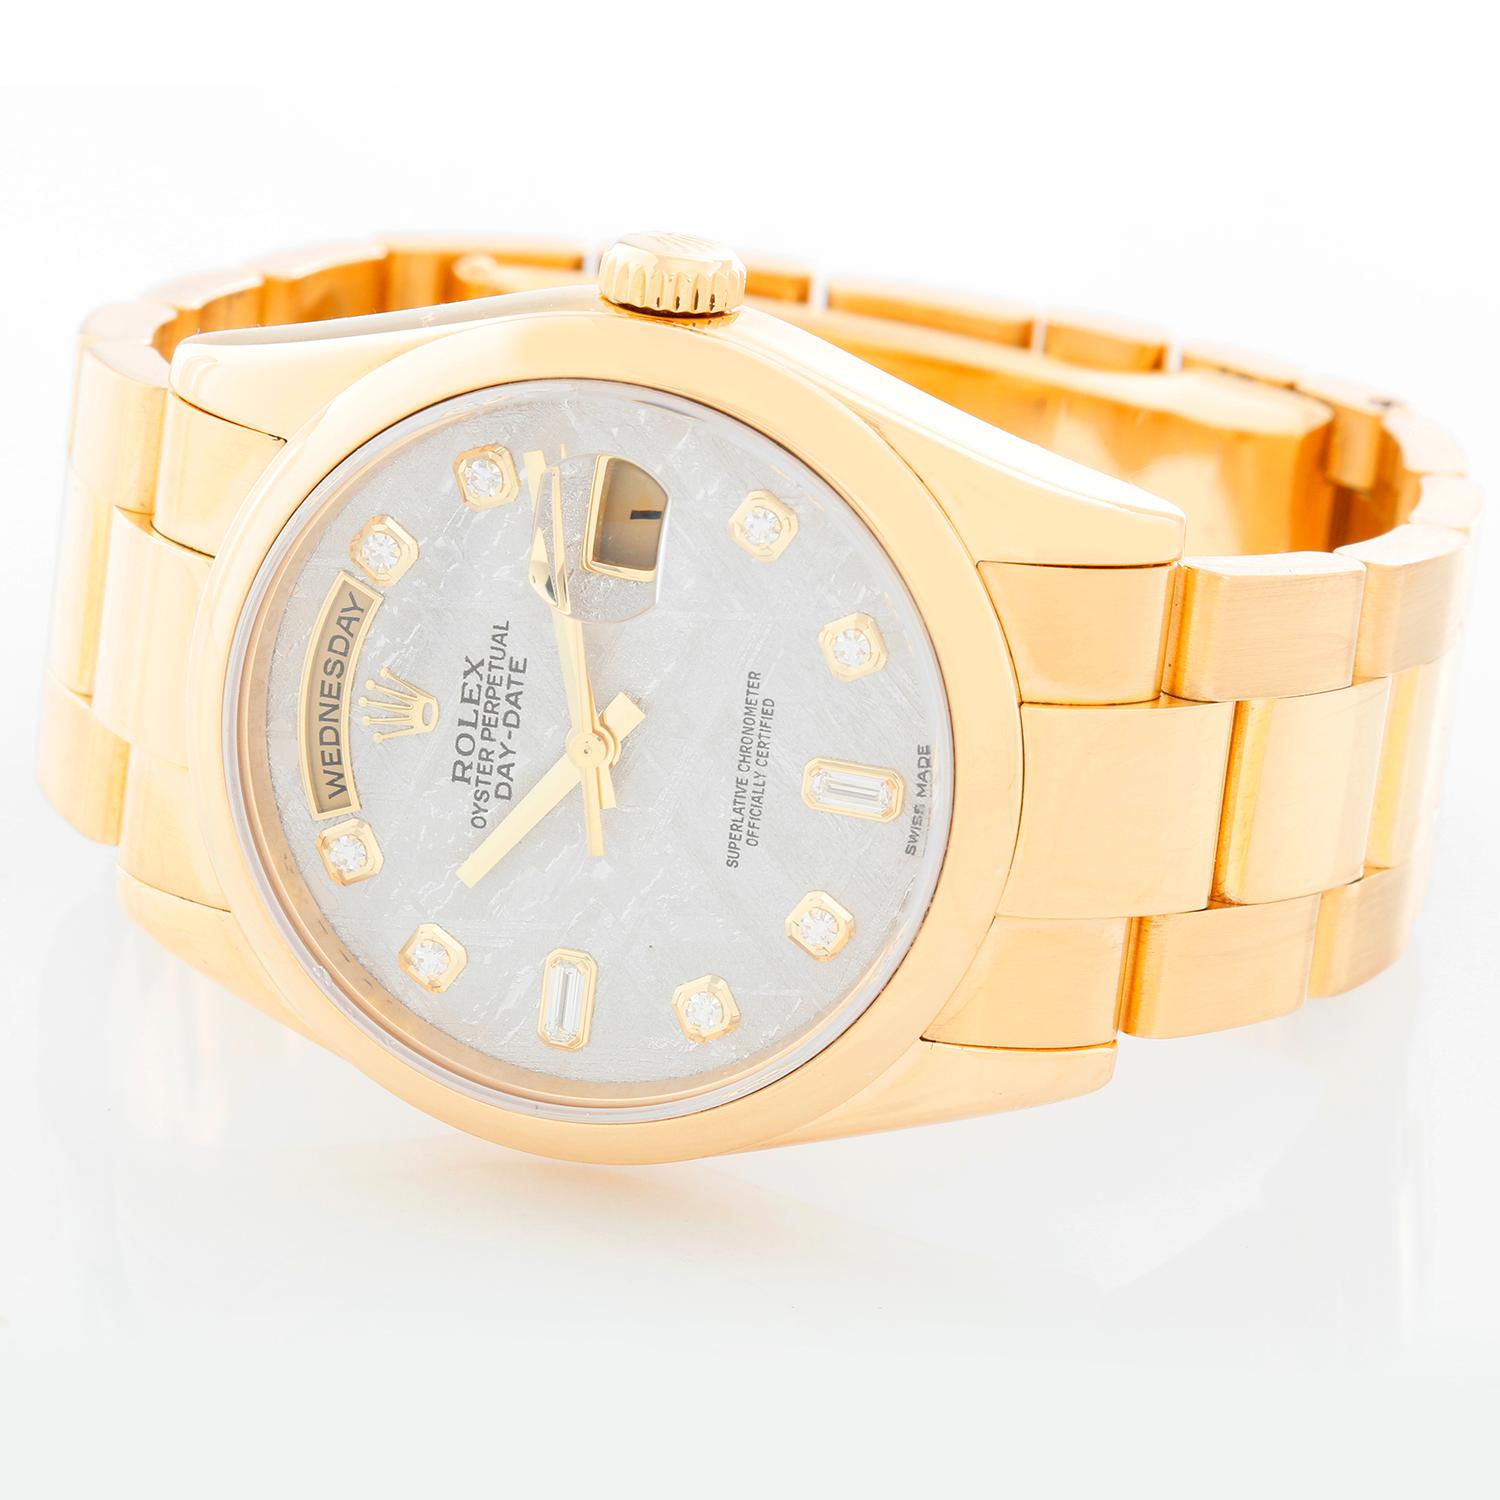 Rolex President Day-Date Men's Watch 118208 - Automatic winding, 31 jewels, Quickset, sapphire crystal. 18k yellow gold case with smooth bezel (36 mm). Factory Meteorite diamond dial. 18k yellow gold  Oyster bracelet with new style polished buckle.